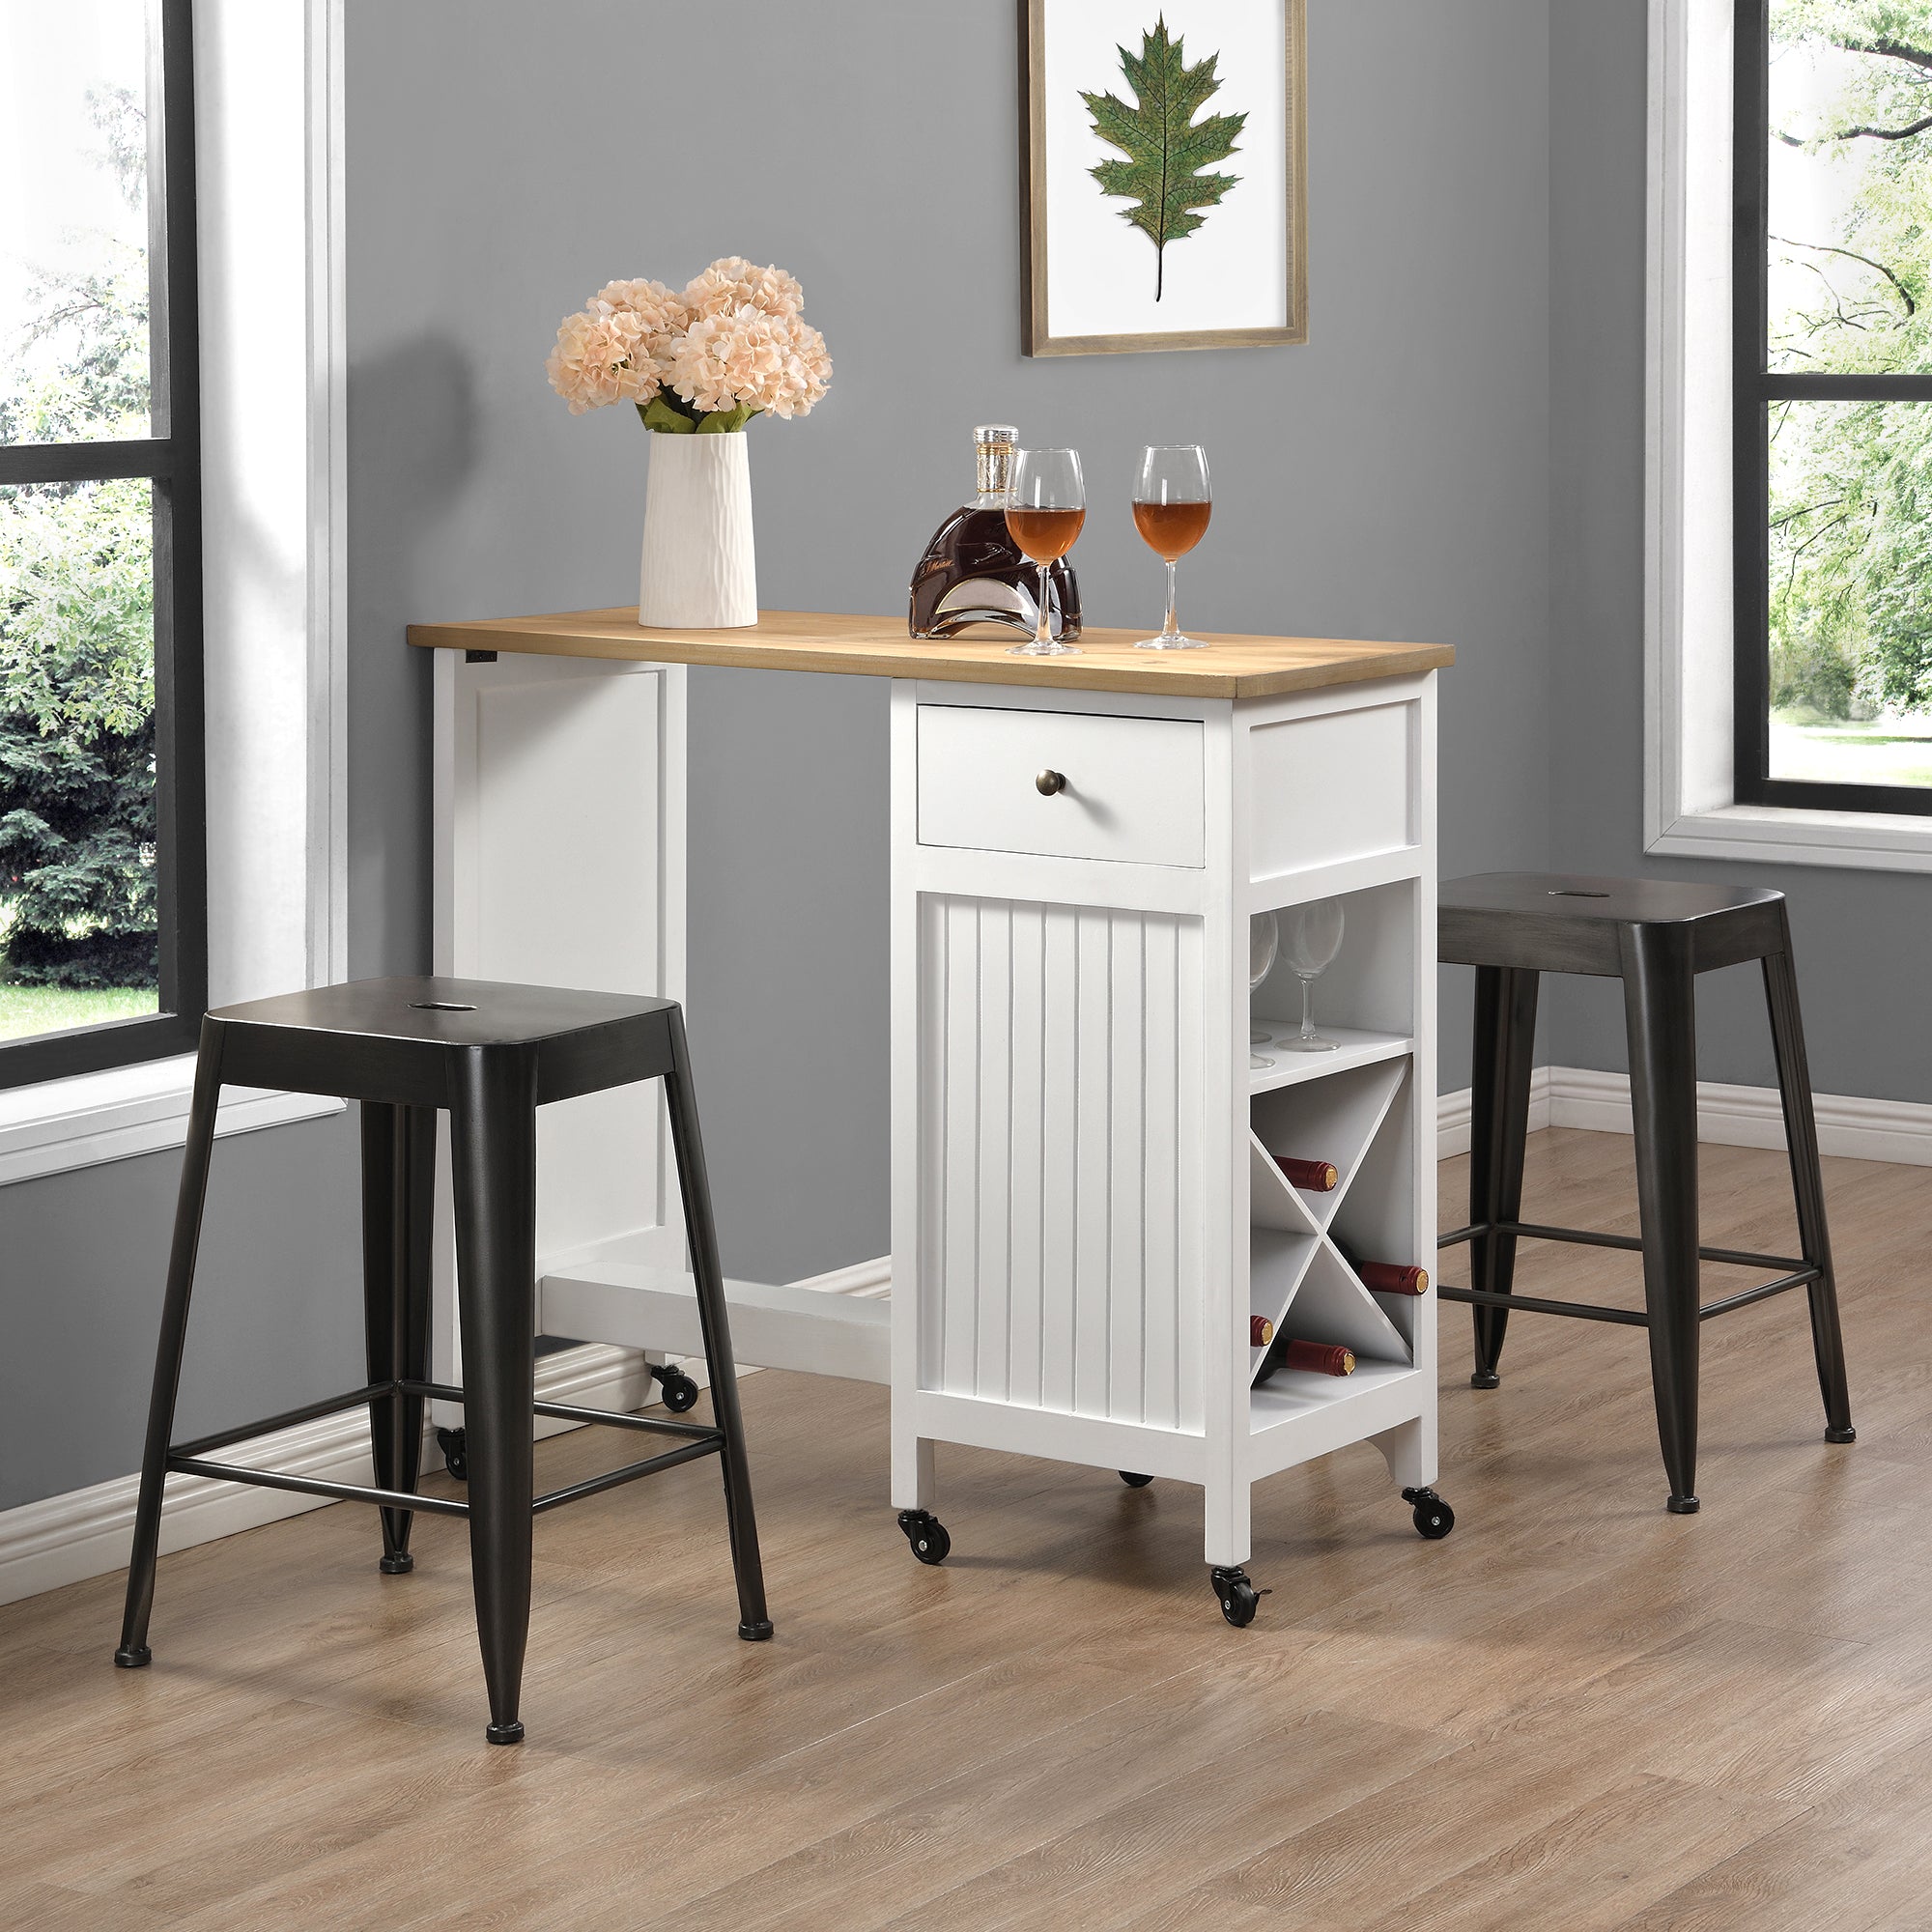 Metal counter stools with a white kitchen cart